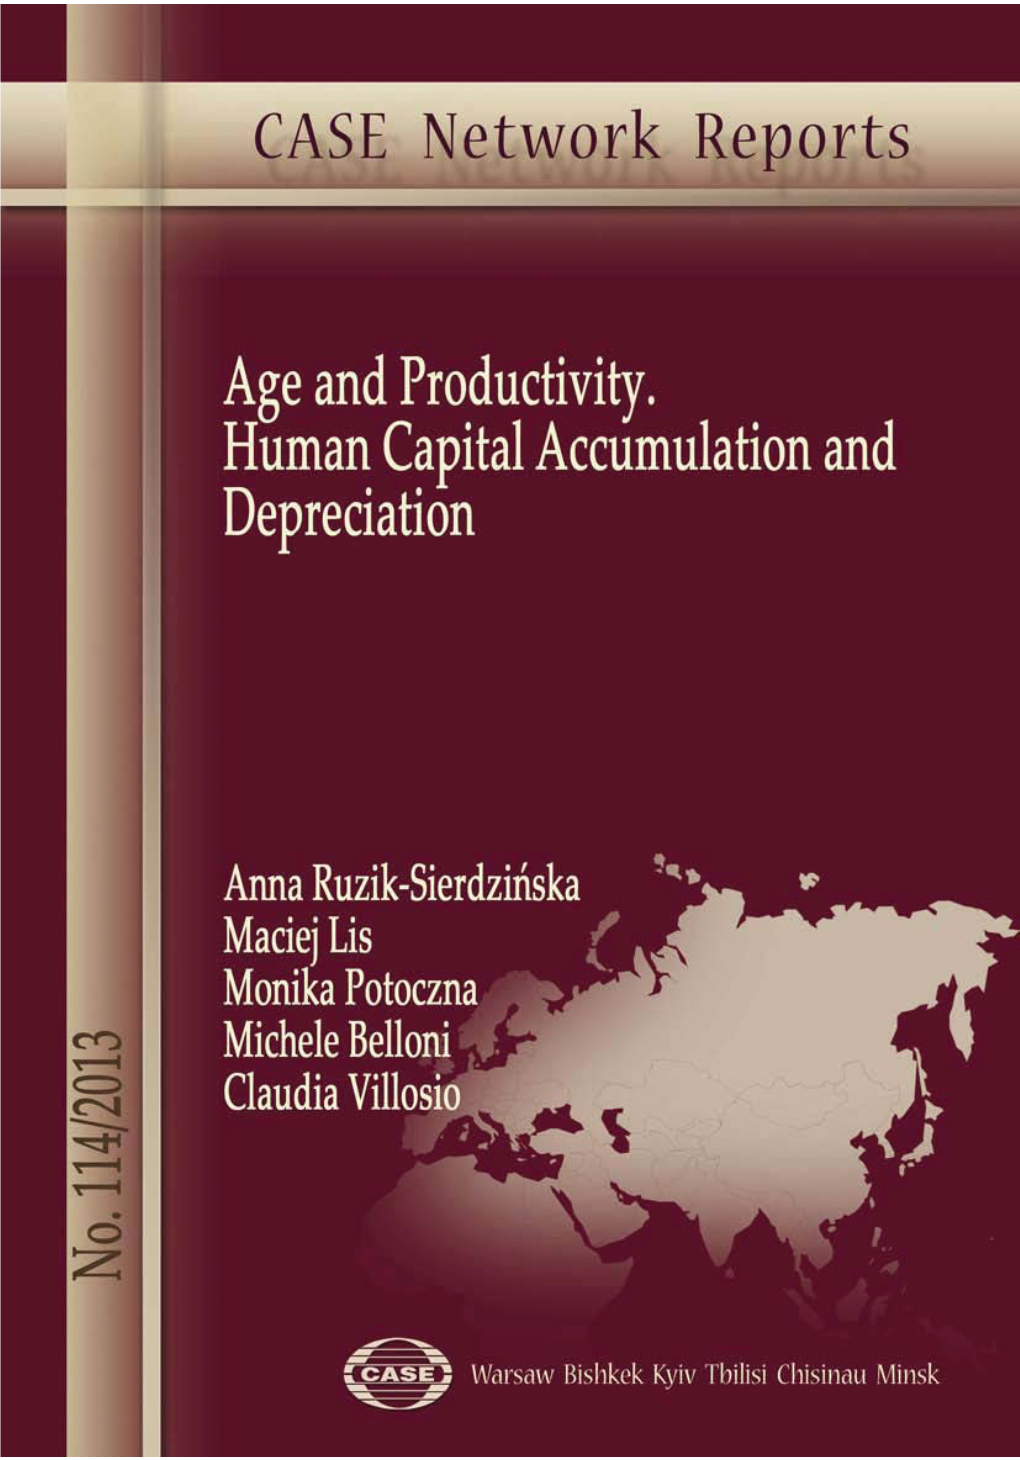 Age and Productivity: Human Capital Accumulation and Depreciation